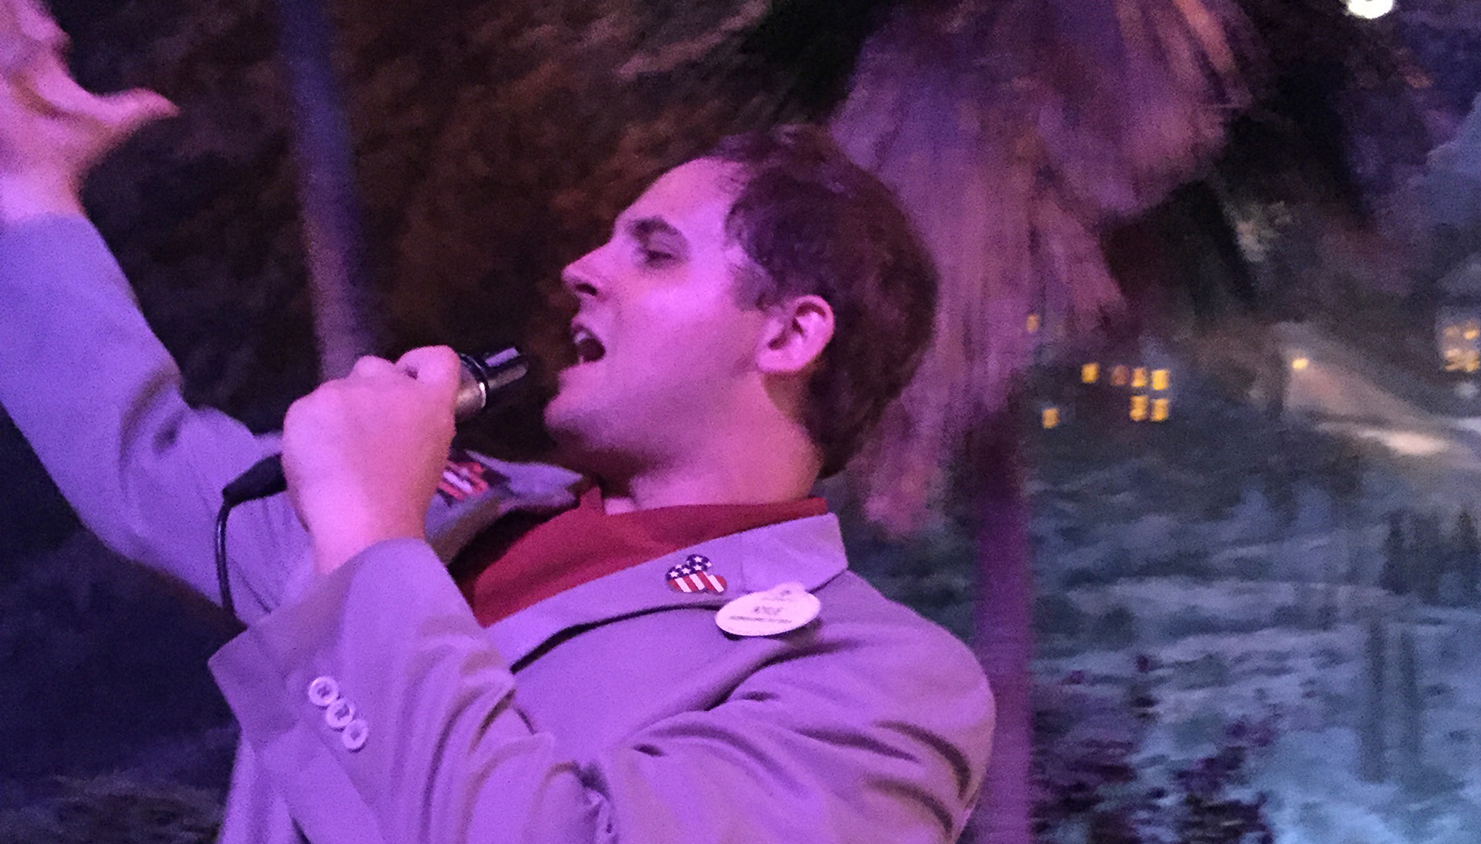 Kyle Forbes works as a cast member at the Great Movie Ride in Disney Hollywood Studios.